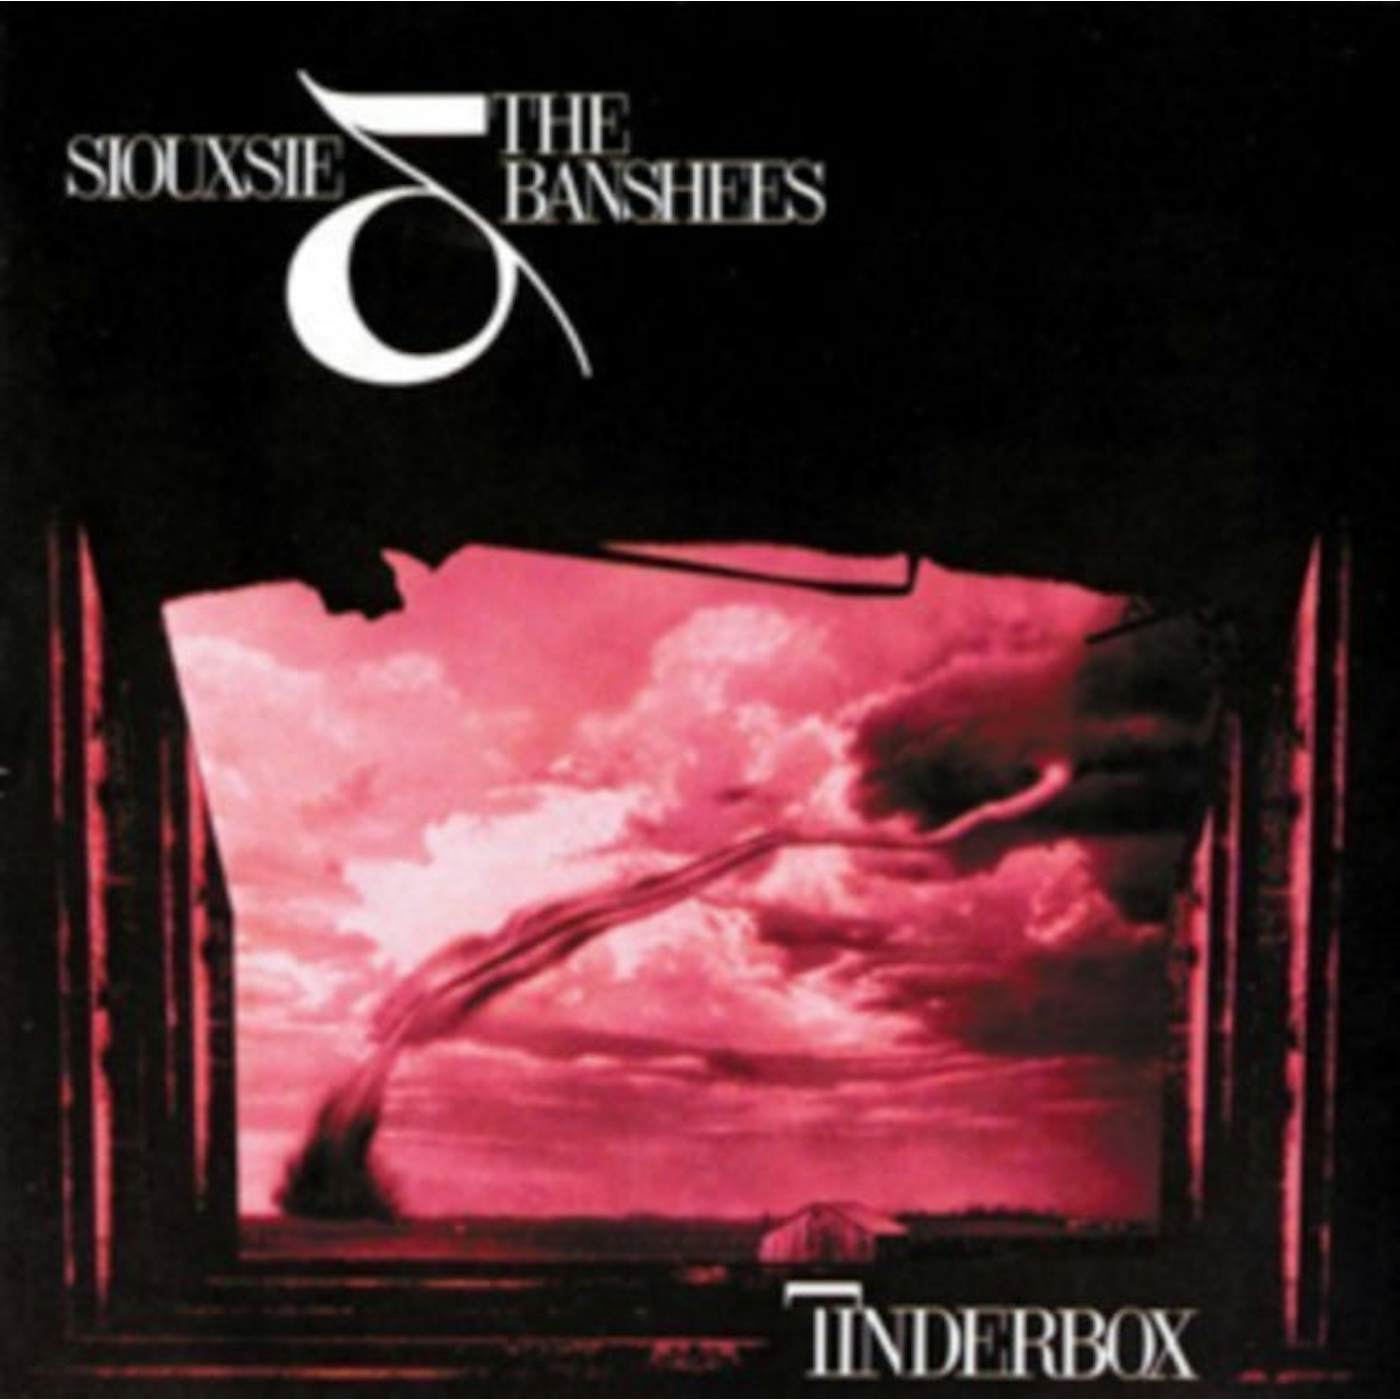 Siouxsie and the Banshees CD - Tinderbox